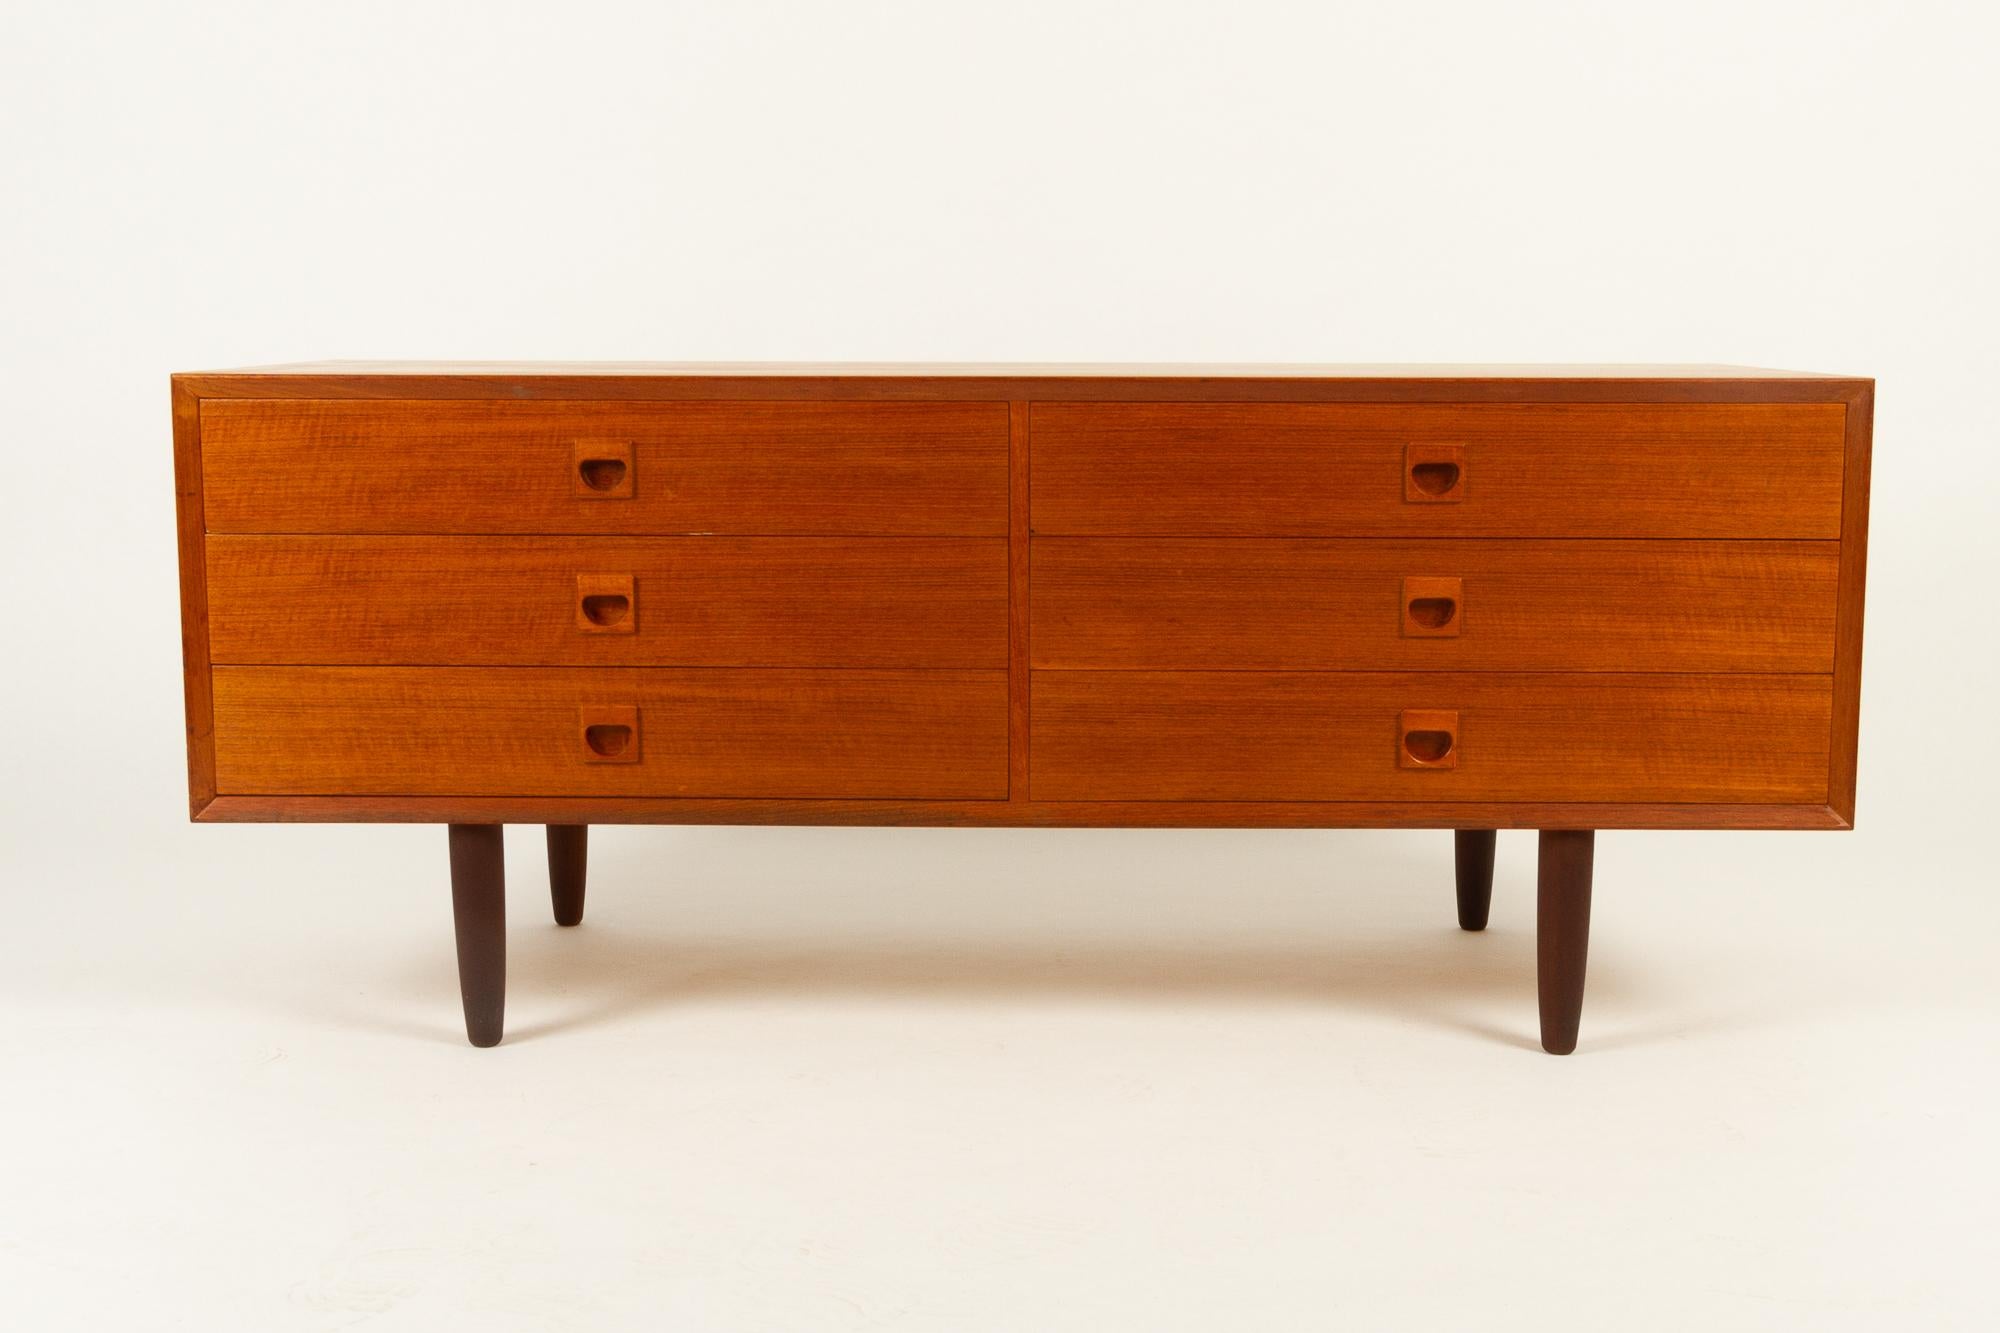 Danish vintage low teak lowboard by Erik Brouer for Brouer Møbelfabrik, 1960s.
Six large drawers with grips in solid teak. Four round tapered legs.
Very versatile, can also function as a chest of drawers or as a TV bench.
Good original vintage